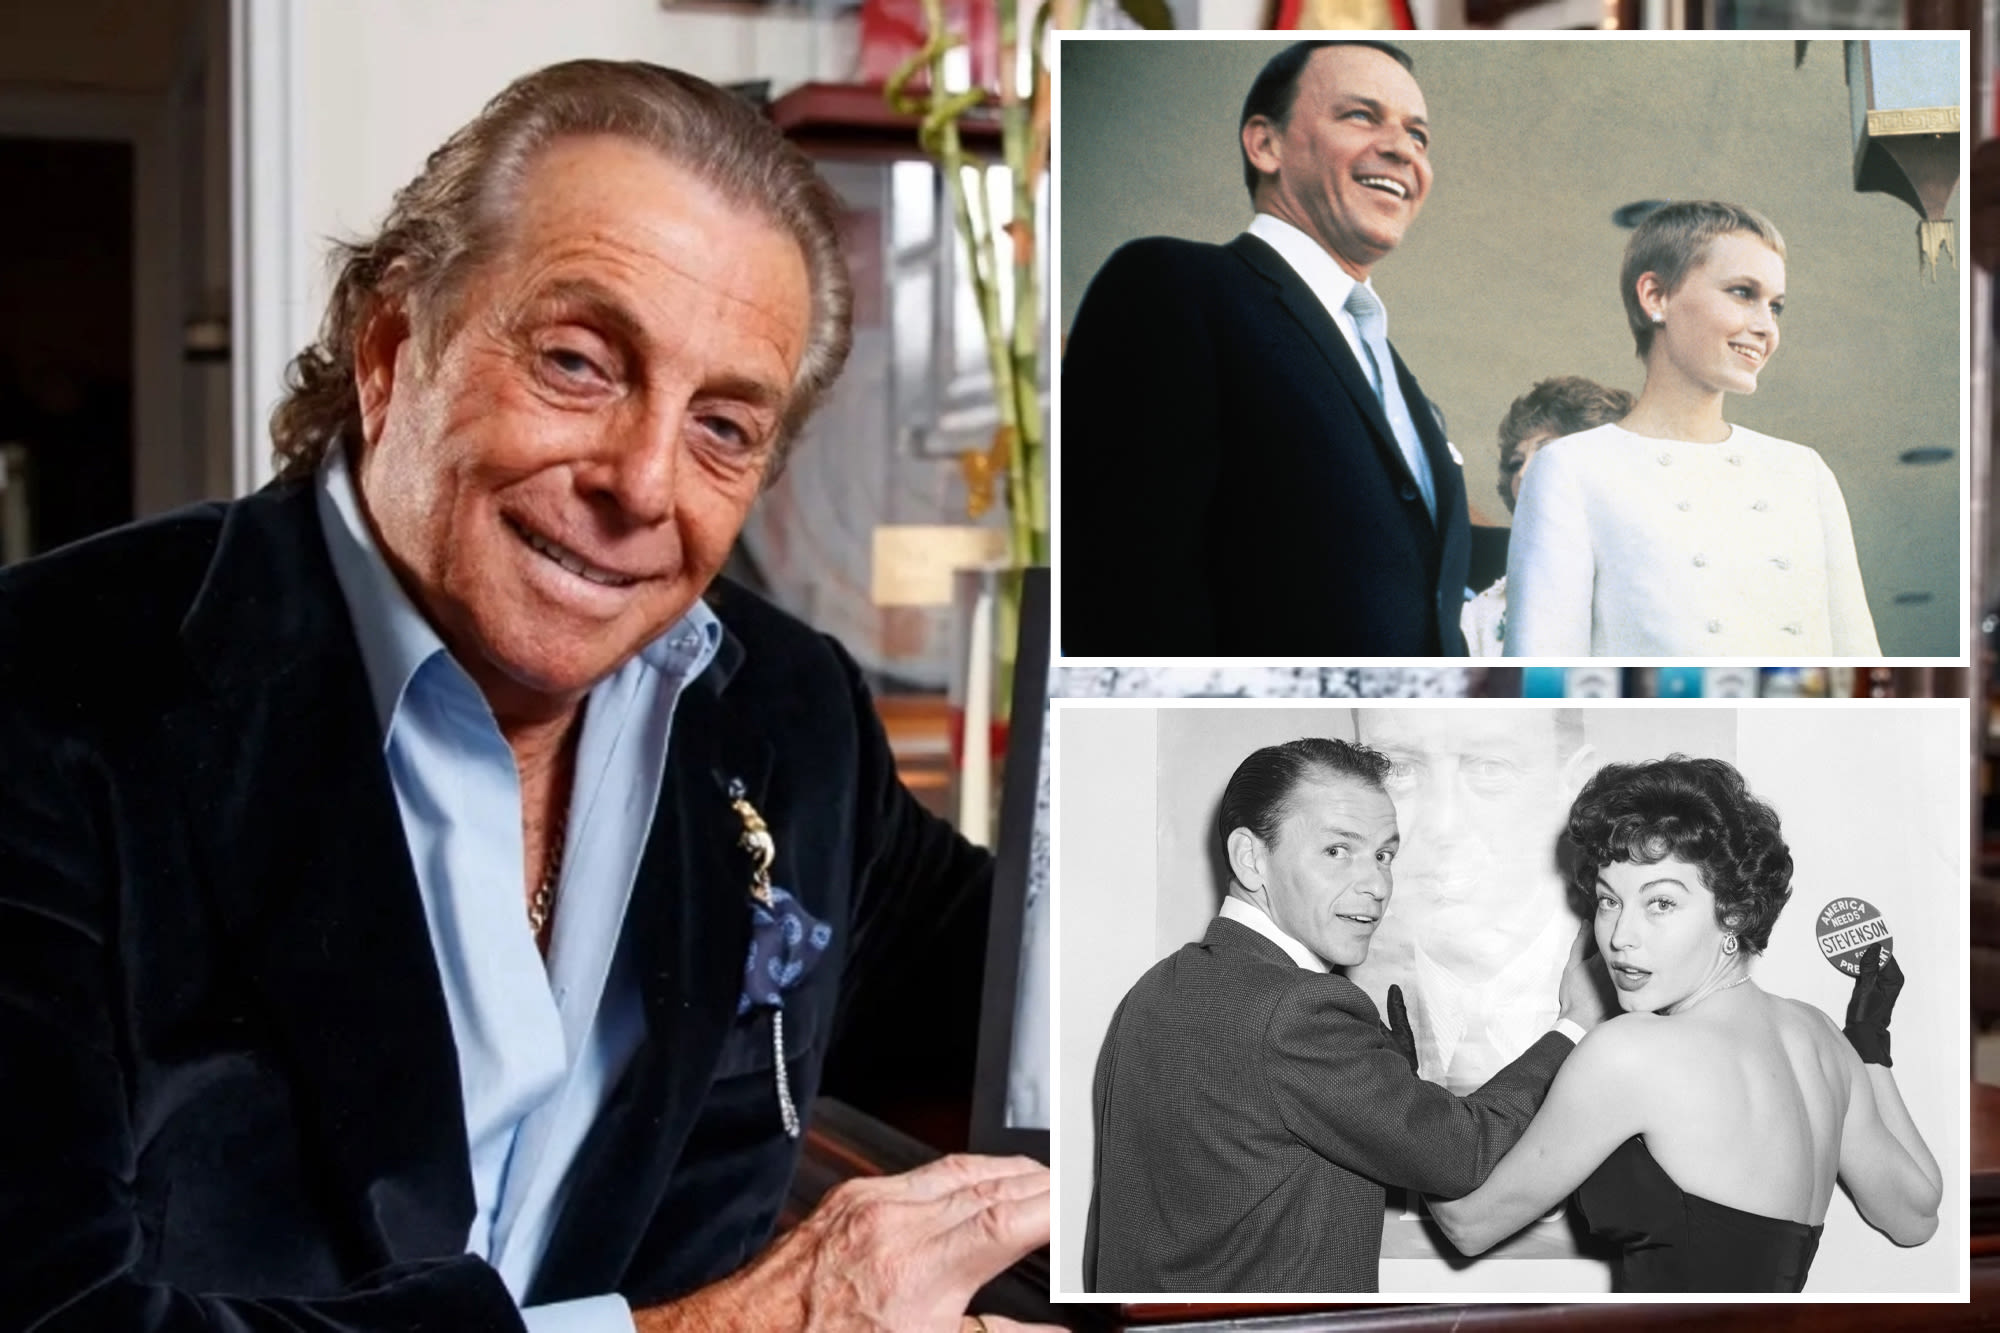 ‘Crybaby’ Frank Sinatra would flee and go ‘fetal’ when fighting with Mia Farrow, tried to kill himself when Ava Gardner cheated: actor neighbor